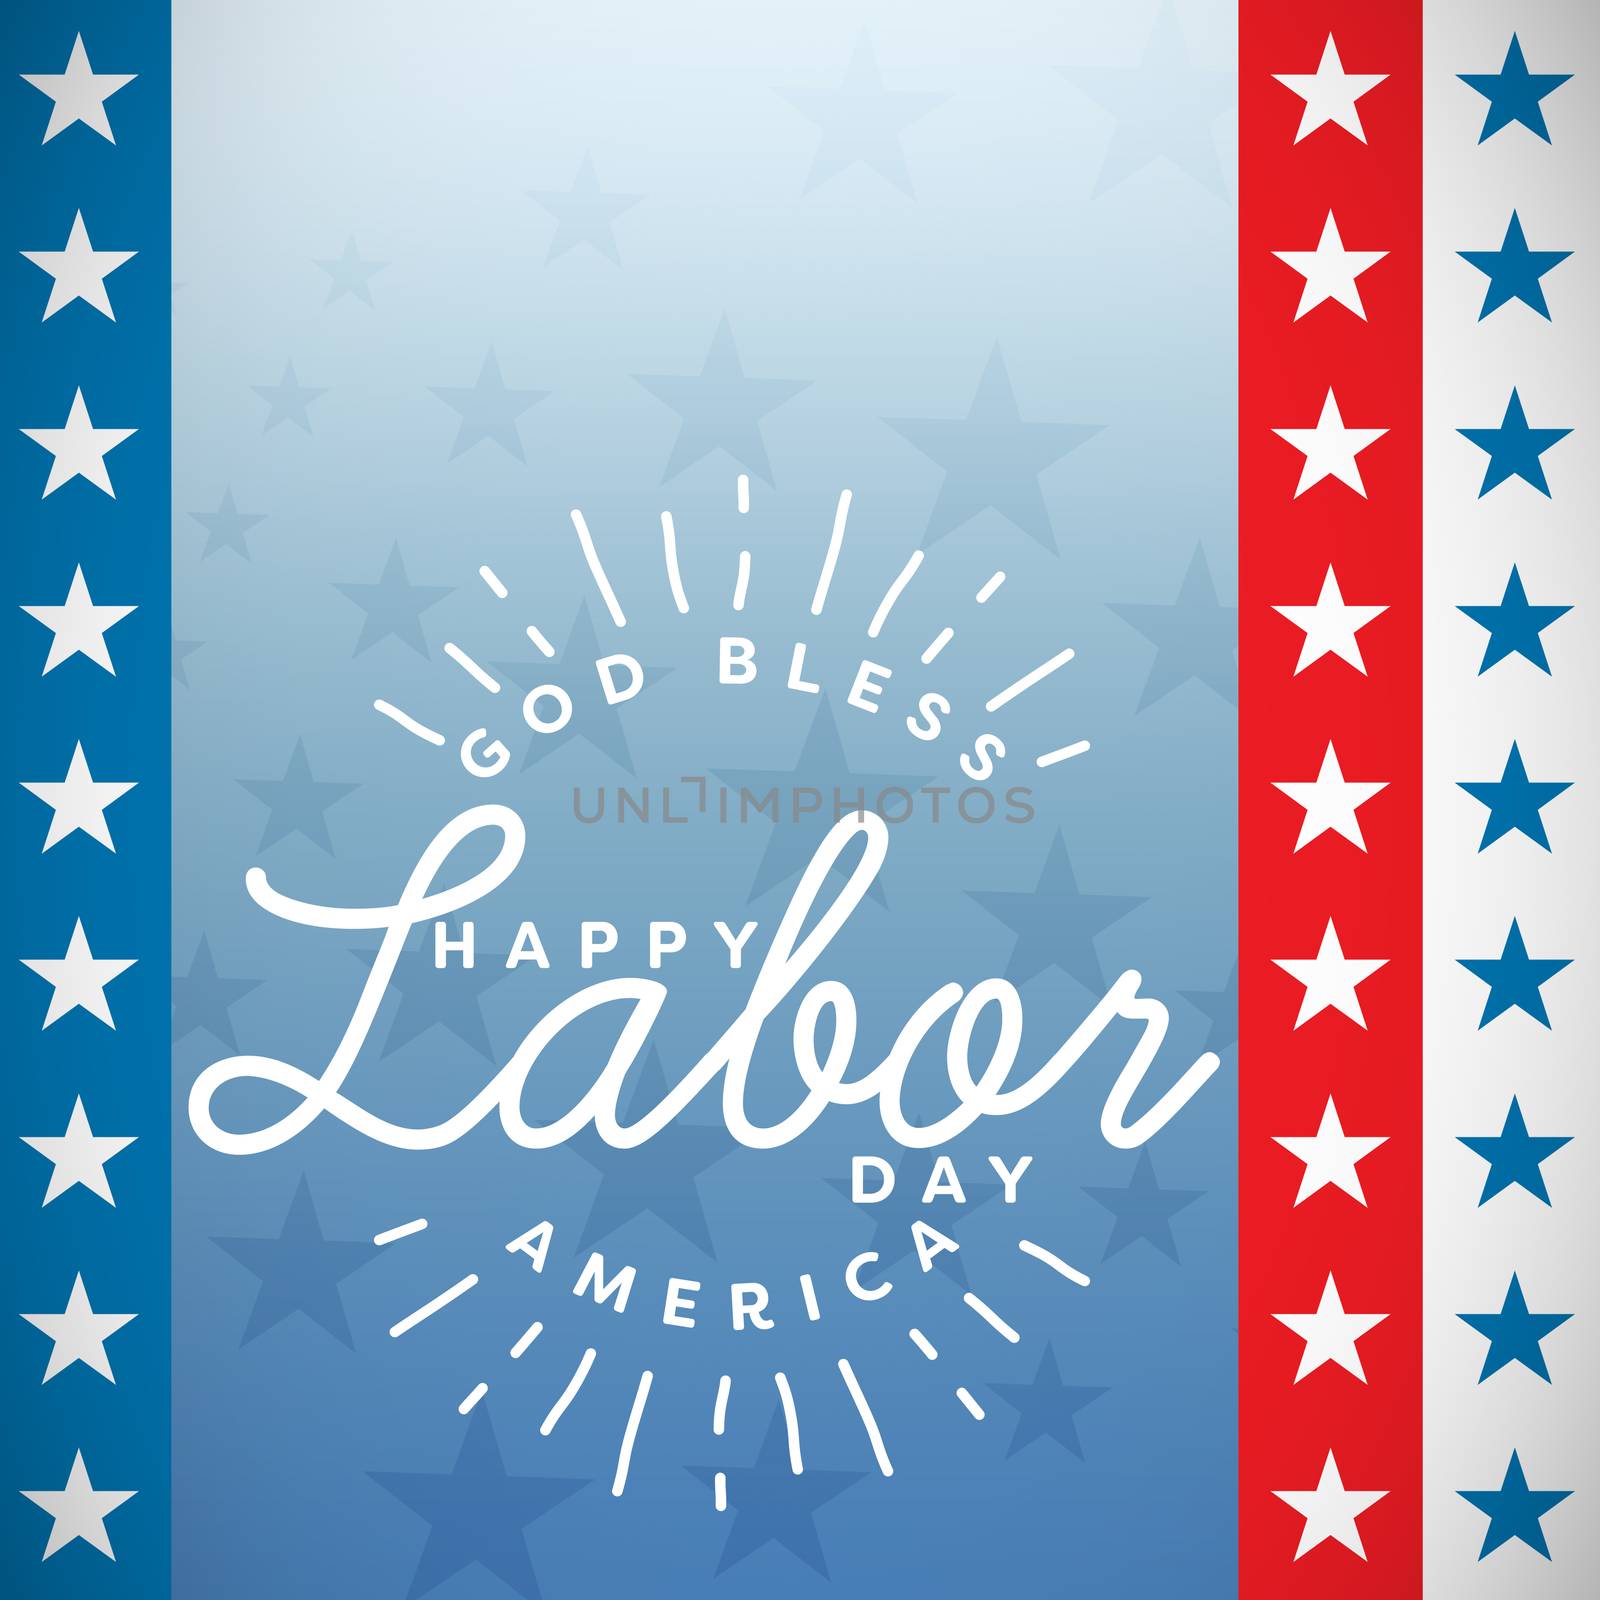 Composite image of composite image of happy labor day and god bless america text by Wavebreakmedia